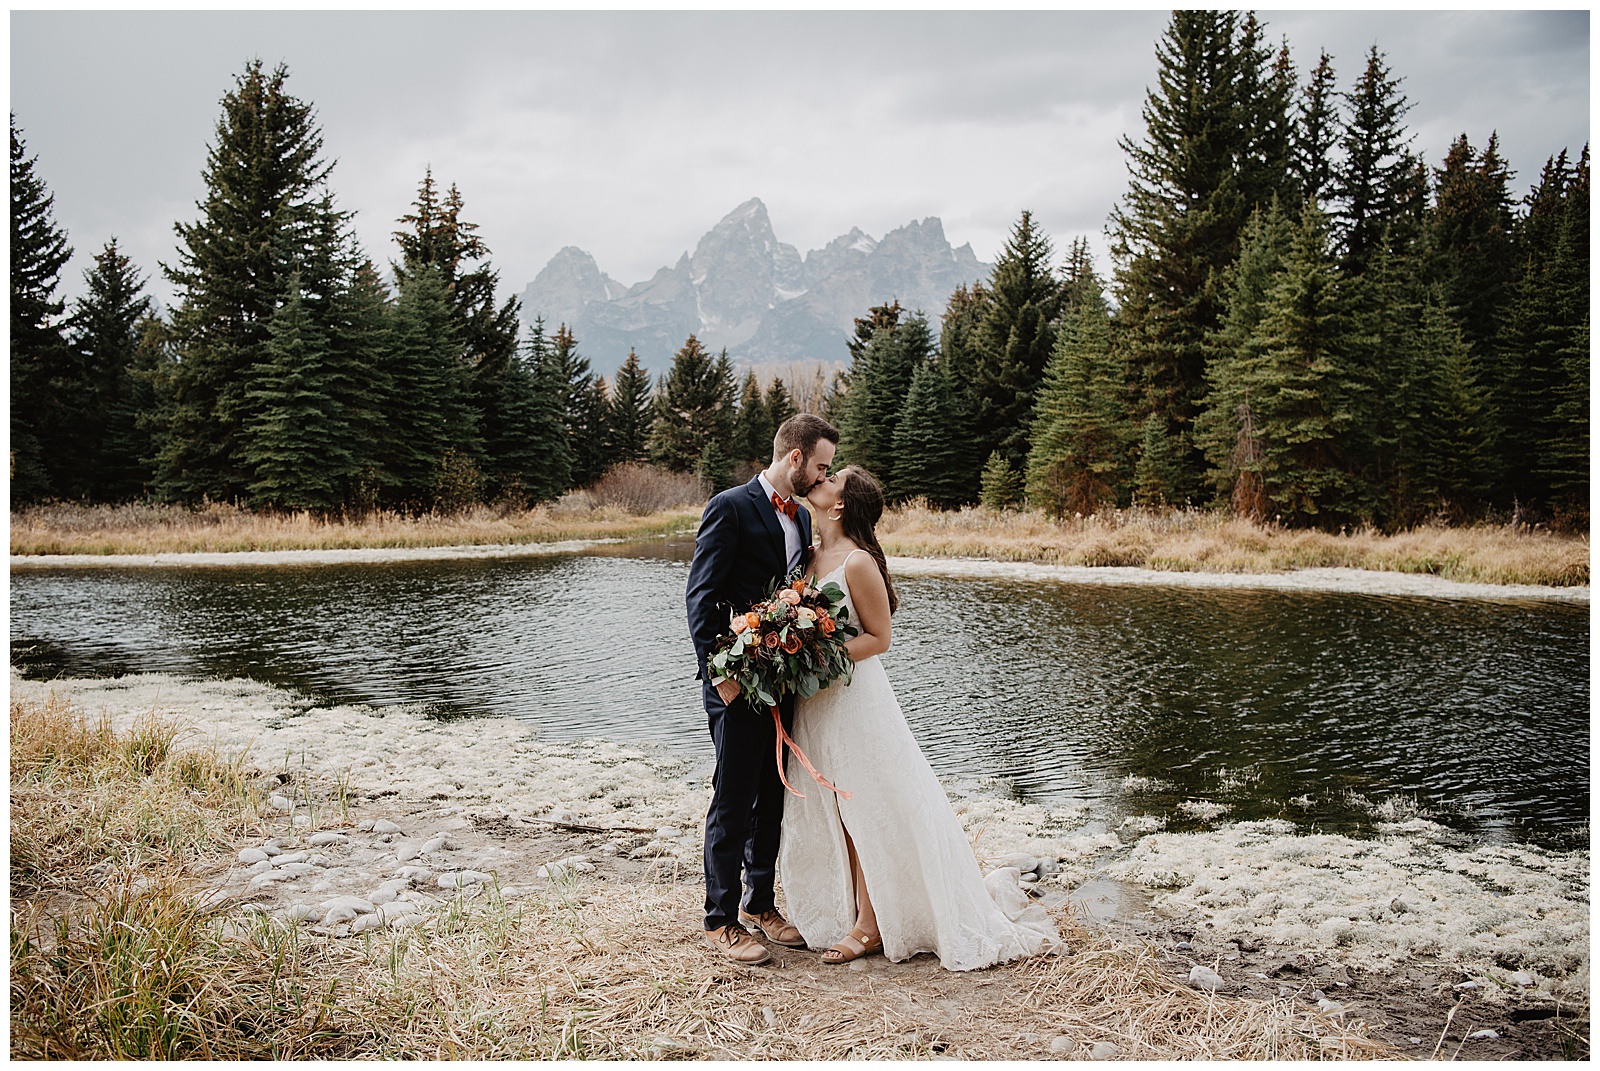 Grand Teton National Park fall wedding day with bride and groom standing in front of a river with tall trees and the Tetons behind them